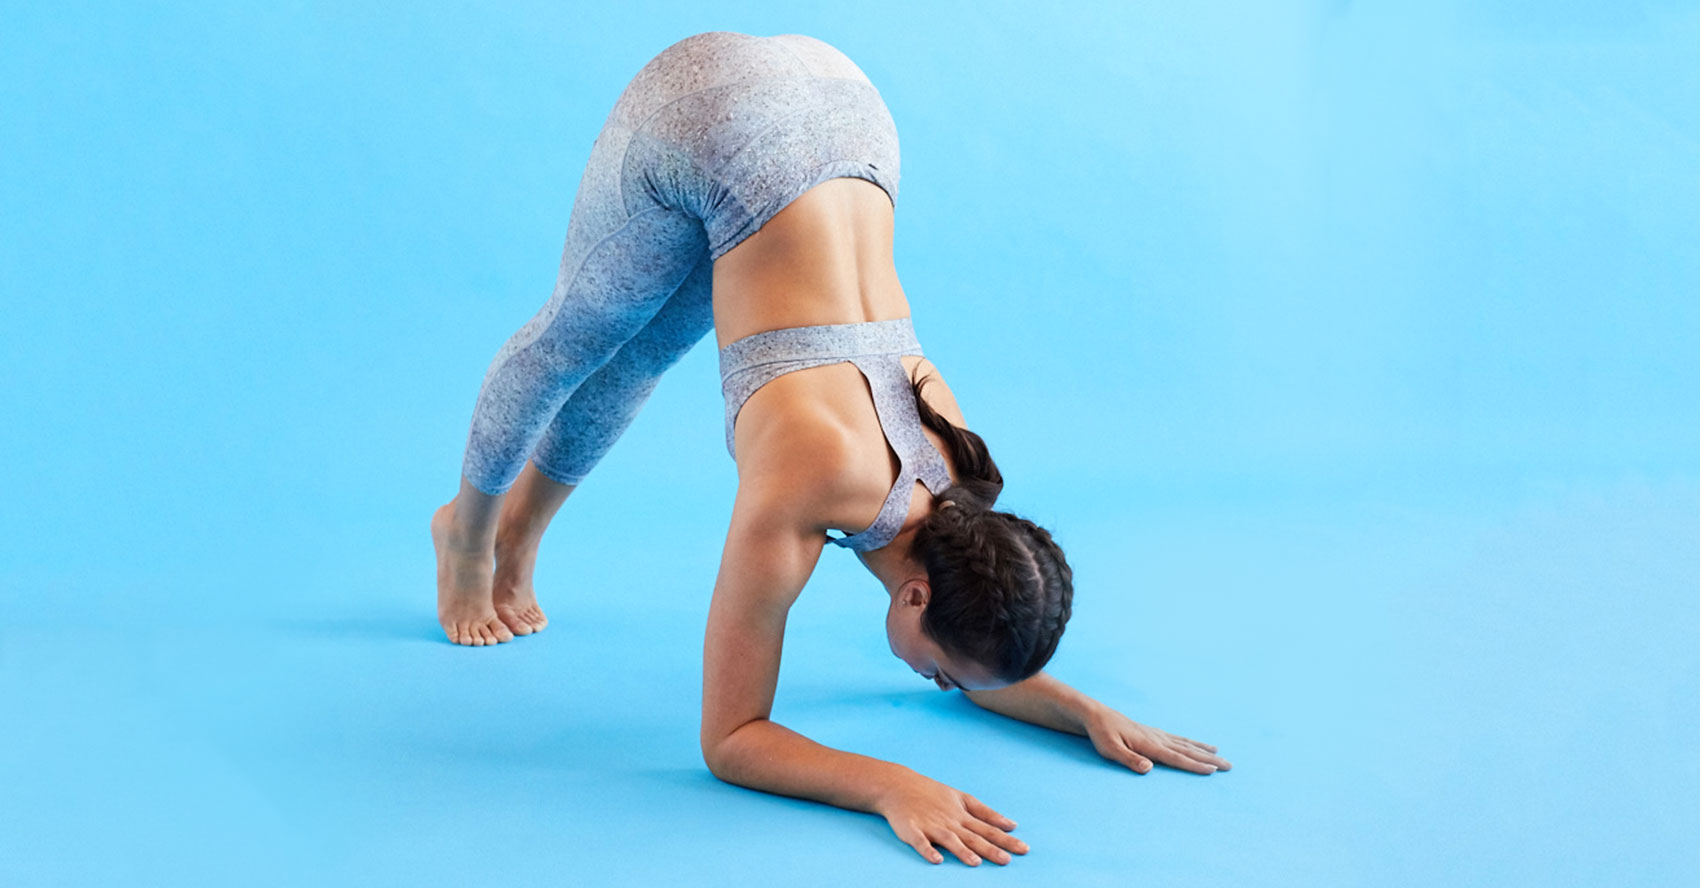 9 yoga poses you can do anywhere